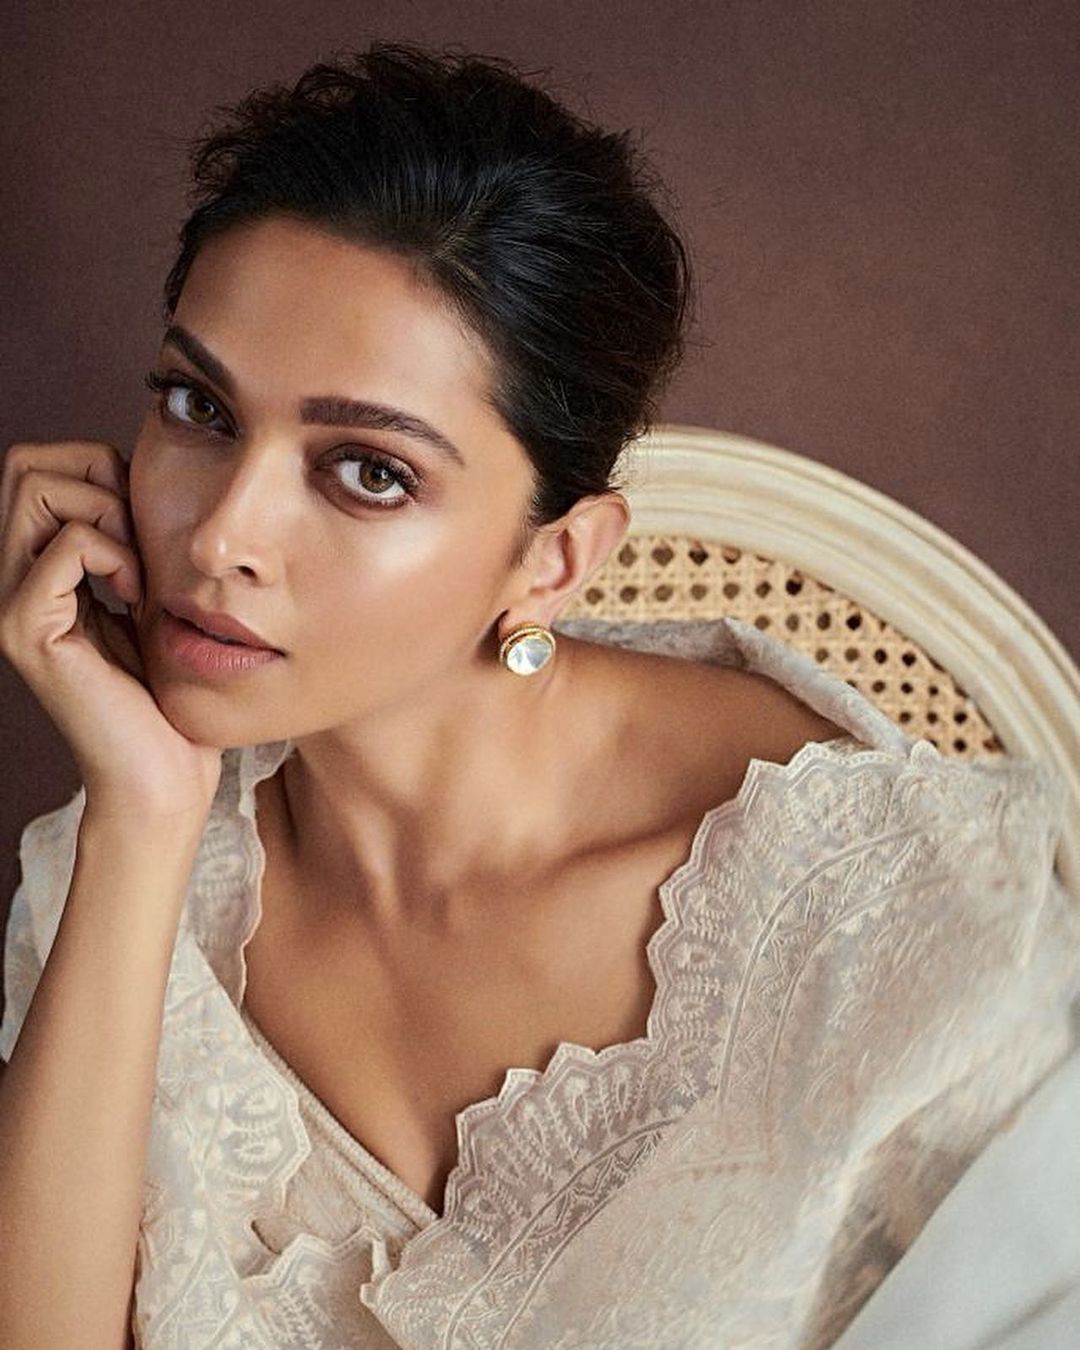 Deepika Padukone is leaving fans in a tizzy with her saree-clad pictures